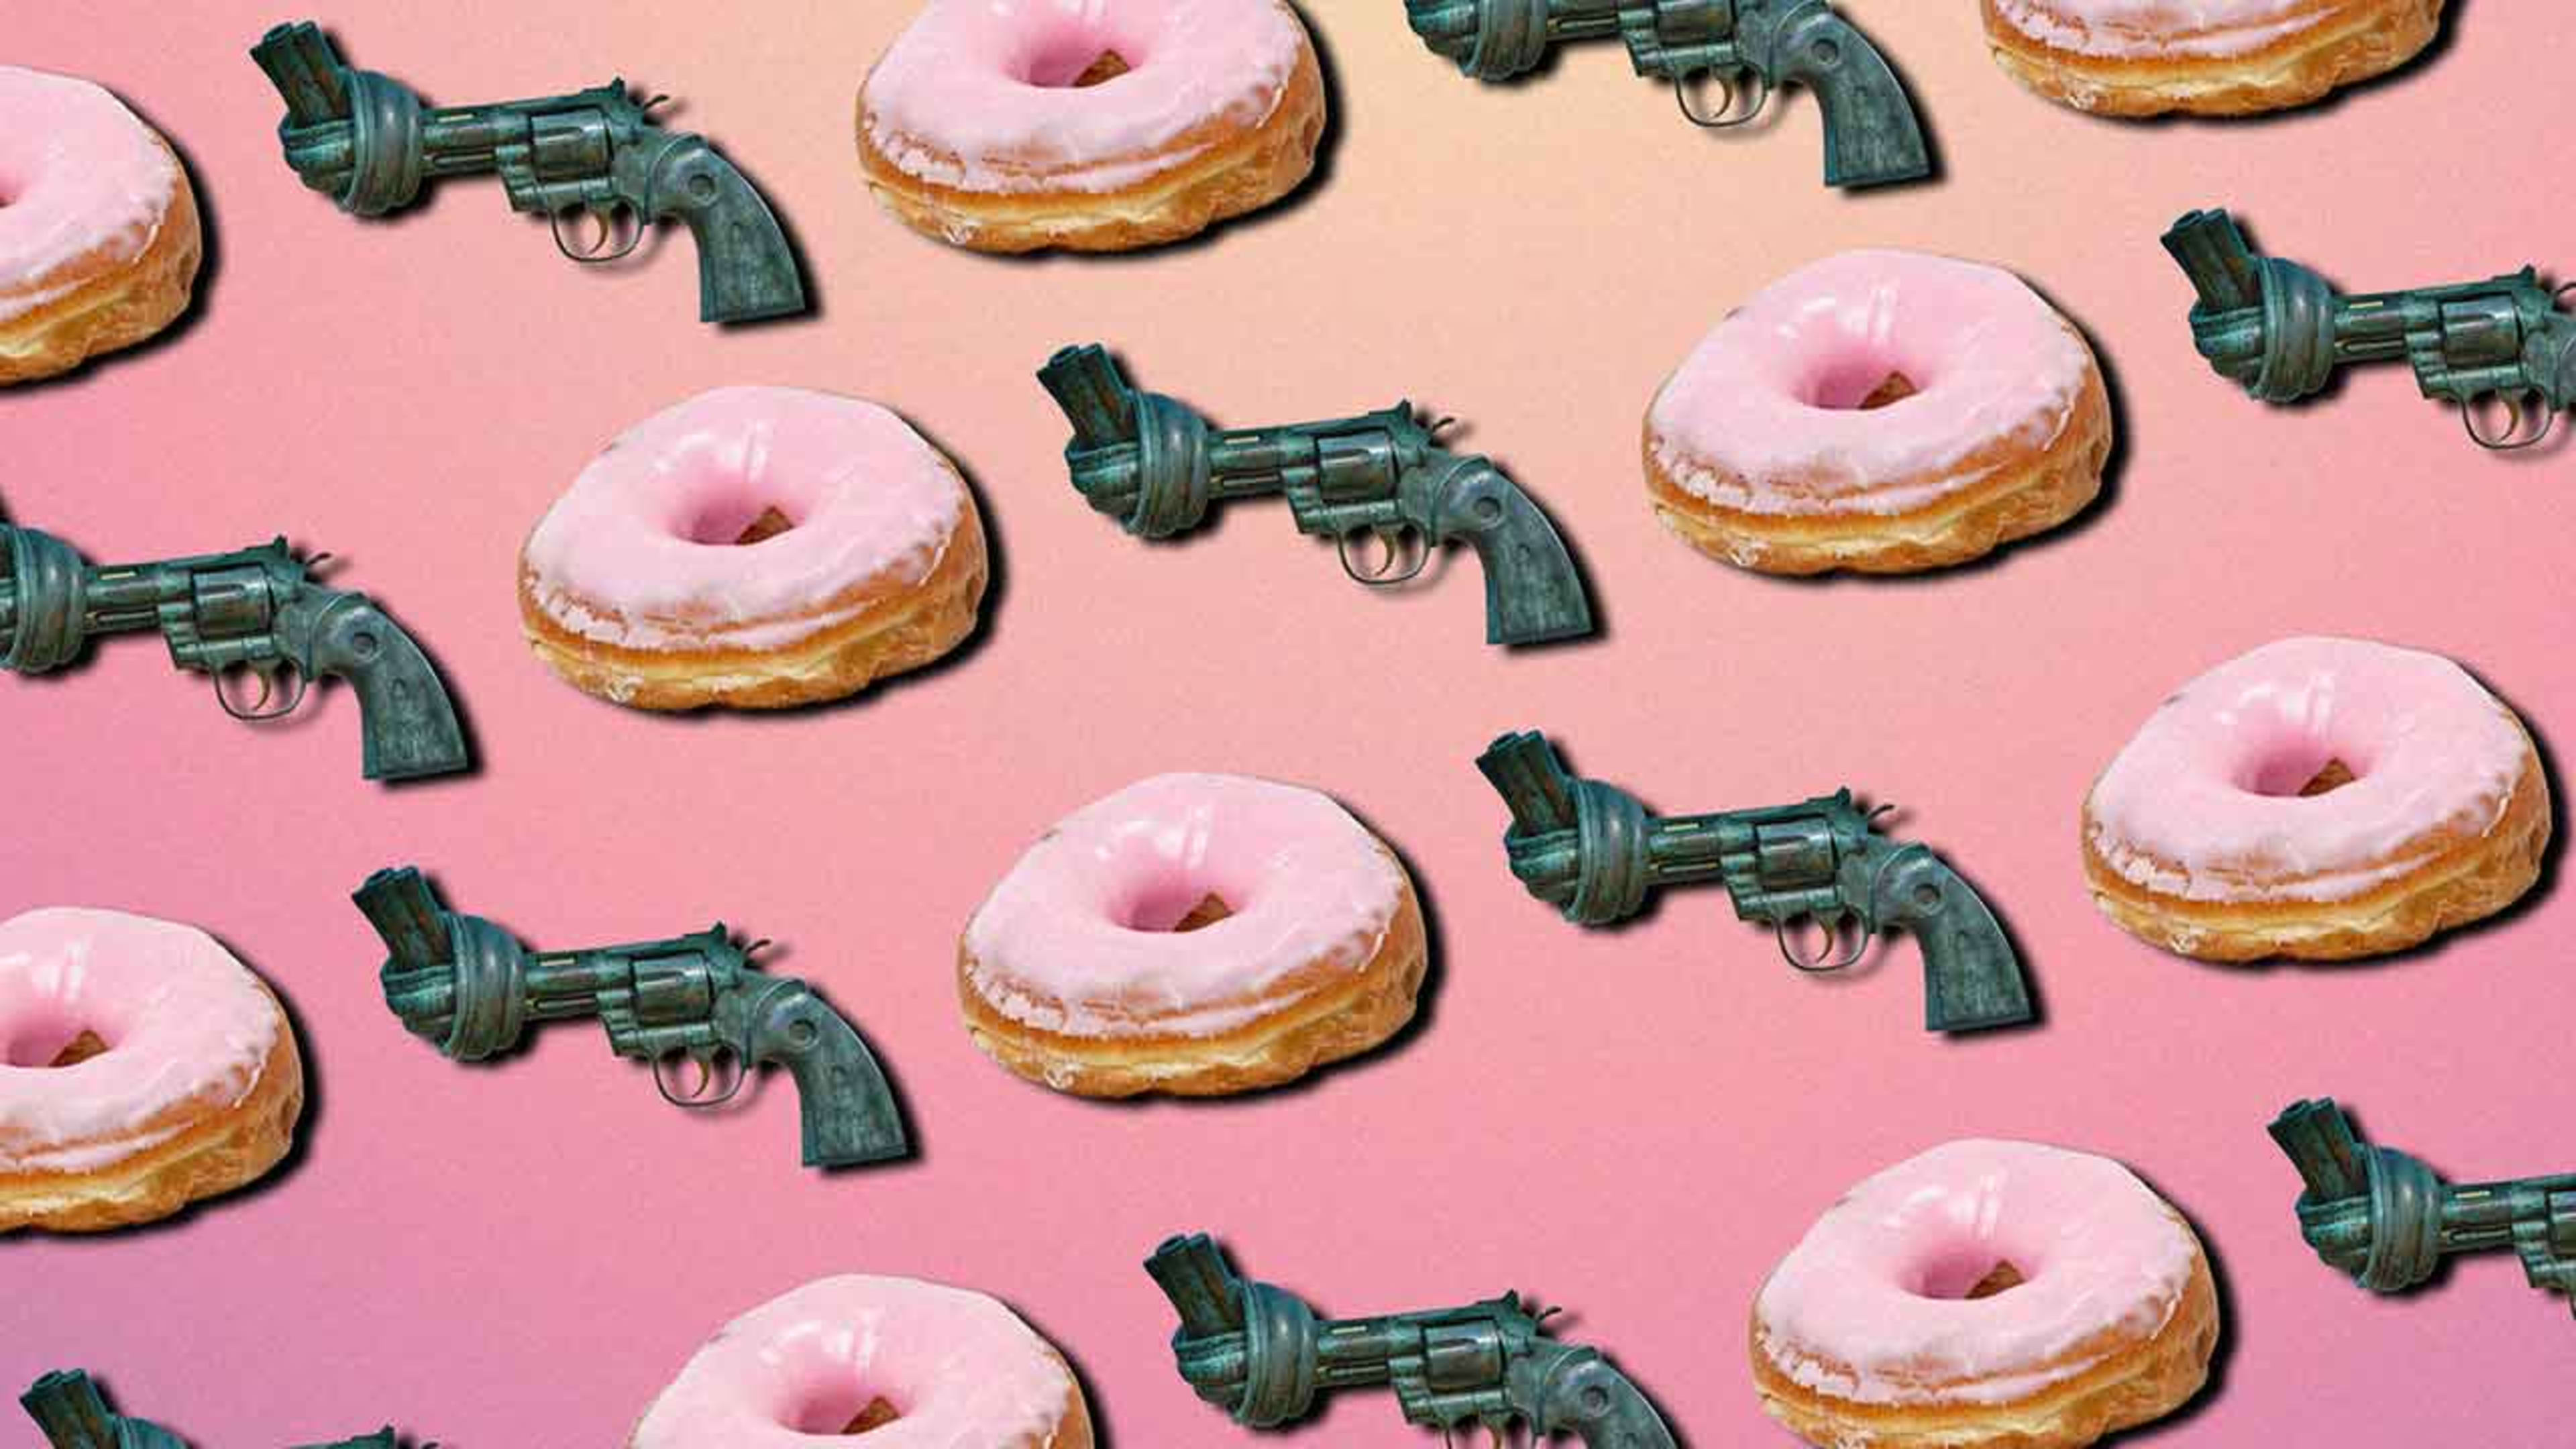 Glock celebrates National Donut Day with the worst possible brand tweet